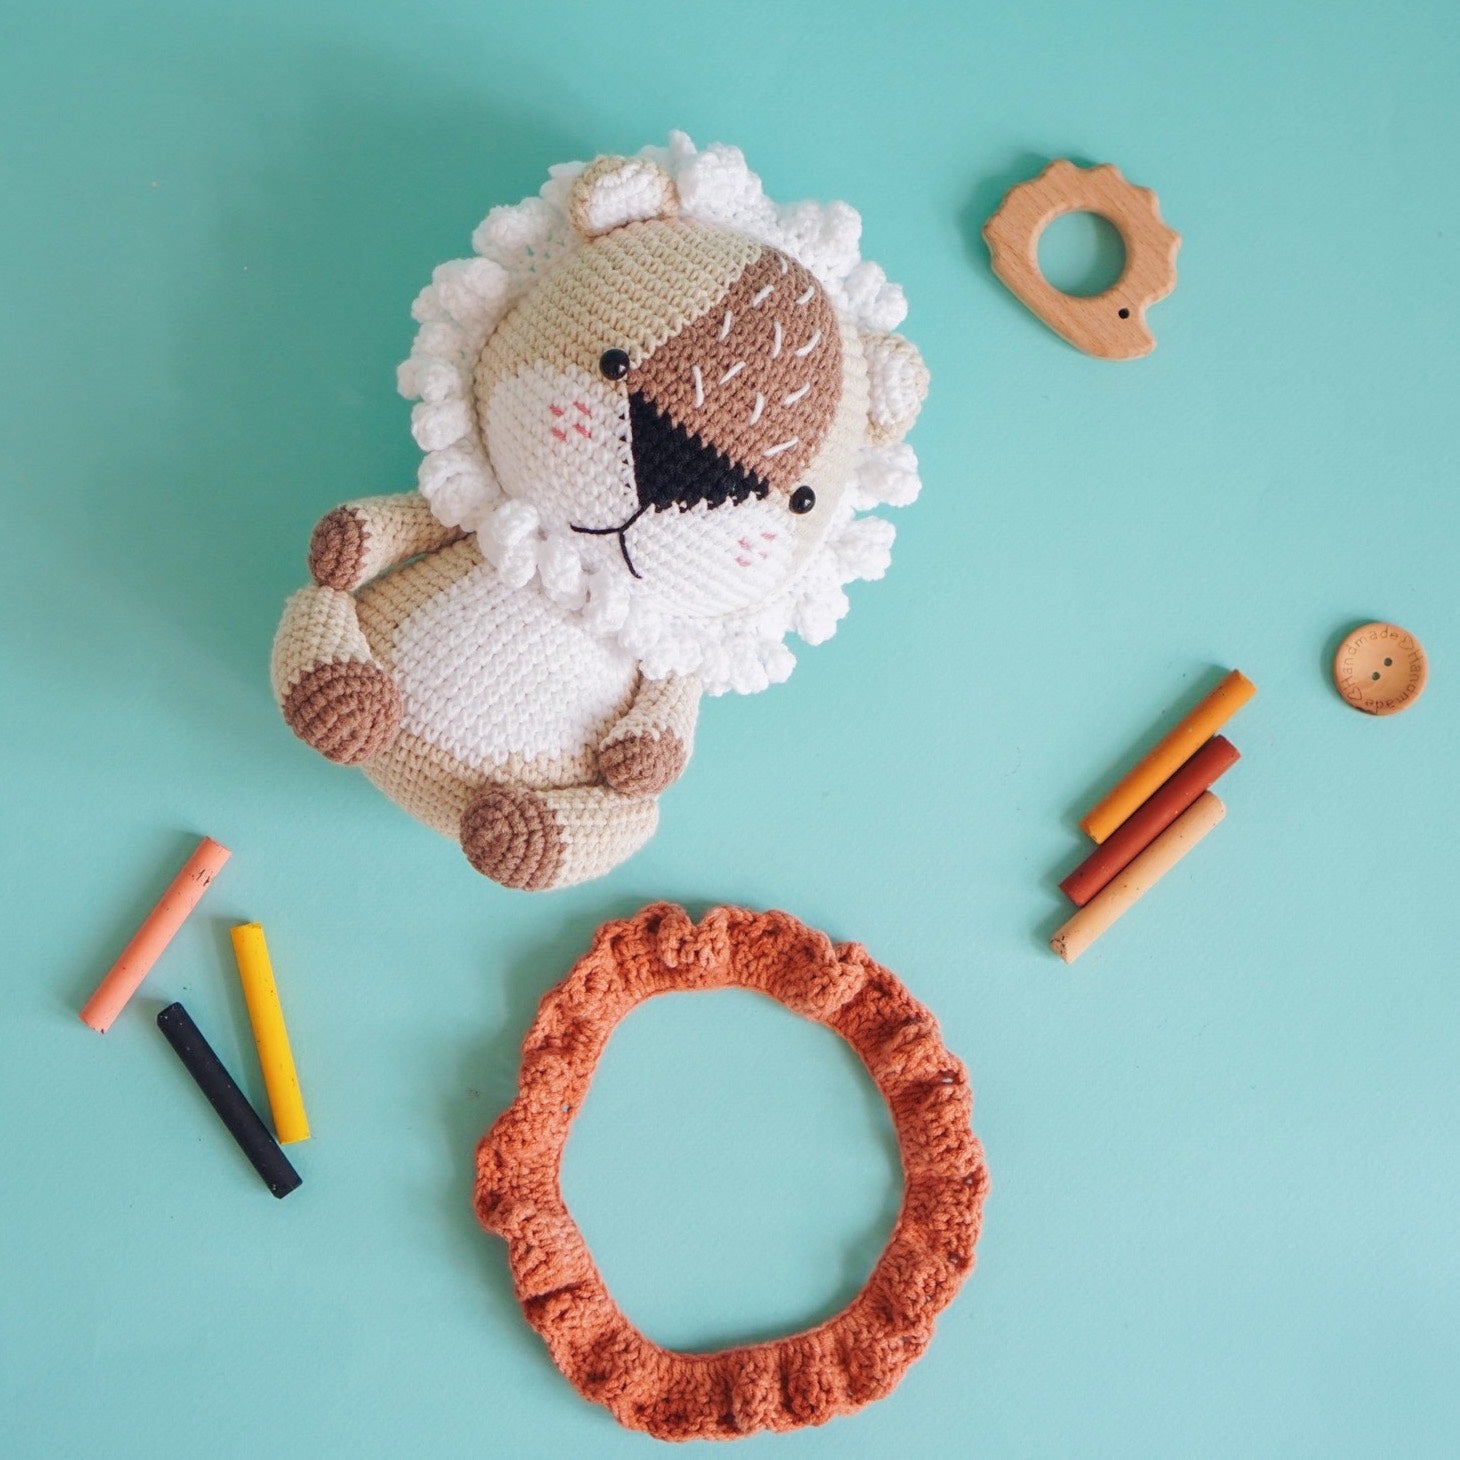 Sunny The Lion  Crochet Pattern by Aquariwool Crochet (Crochet Doll Pattern/Amigurumi Pattern for Baby gift)